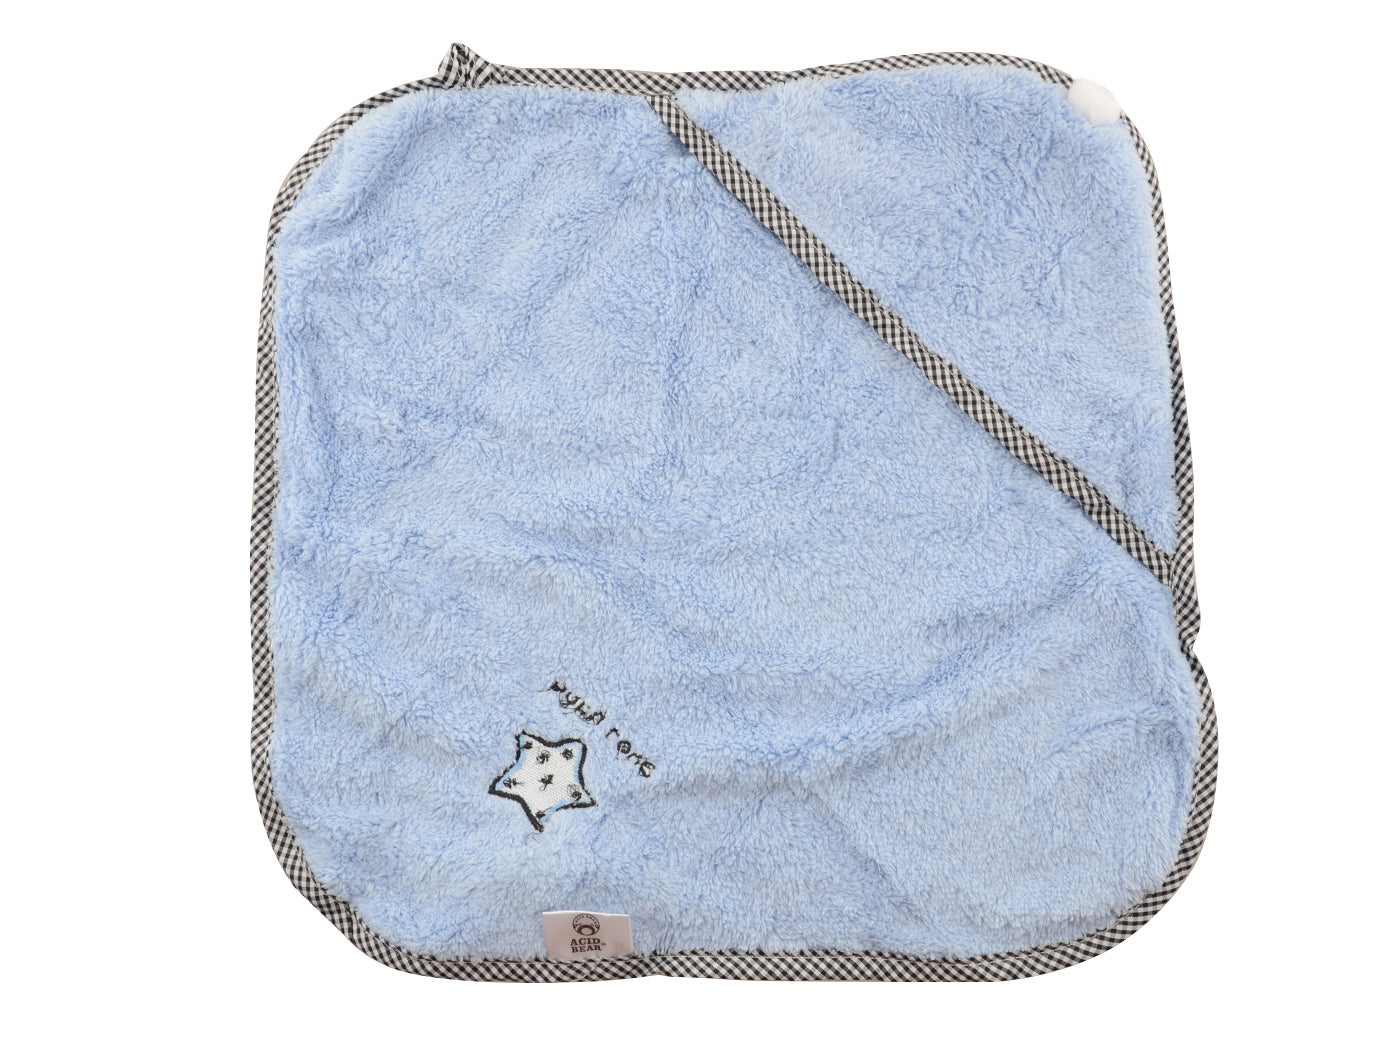 Multifunction Absorbent Puppy Bathrobe and Towel